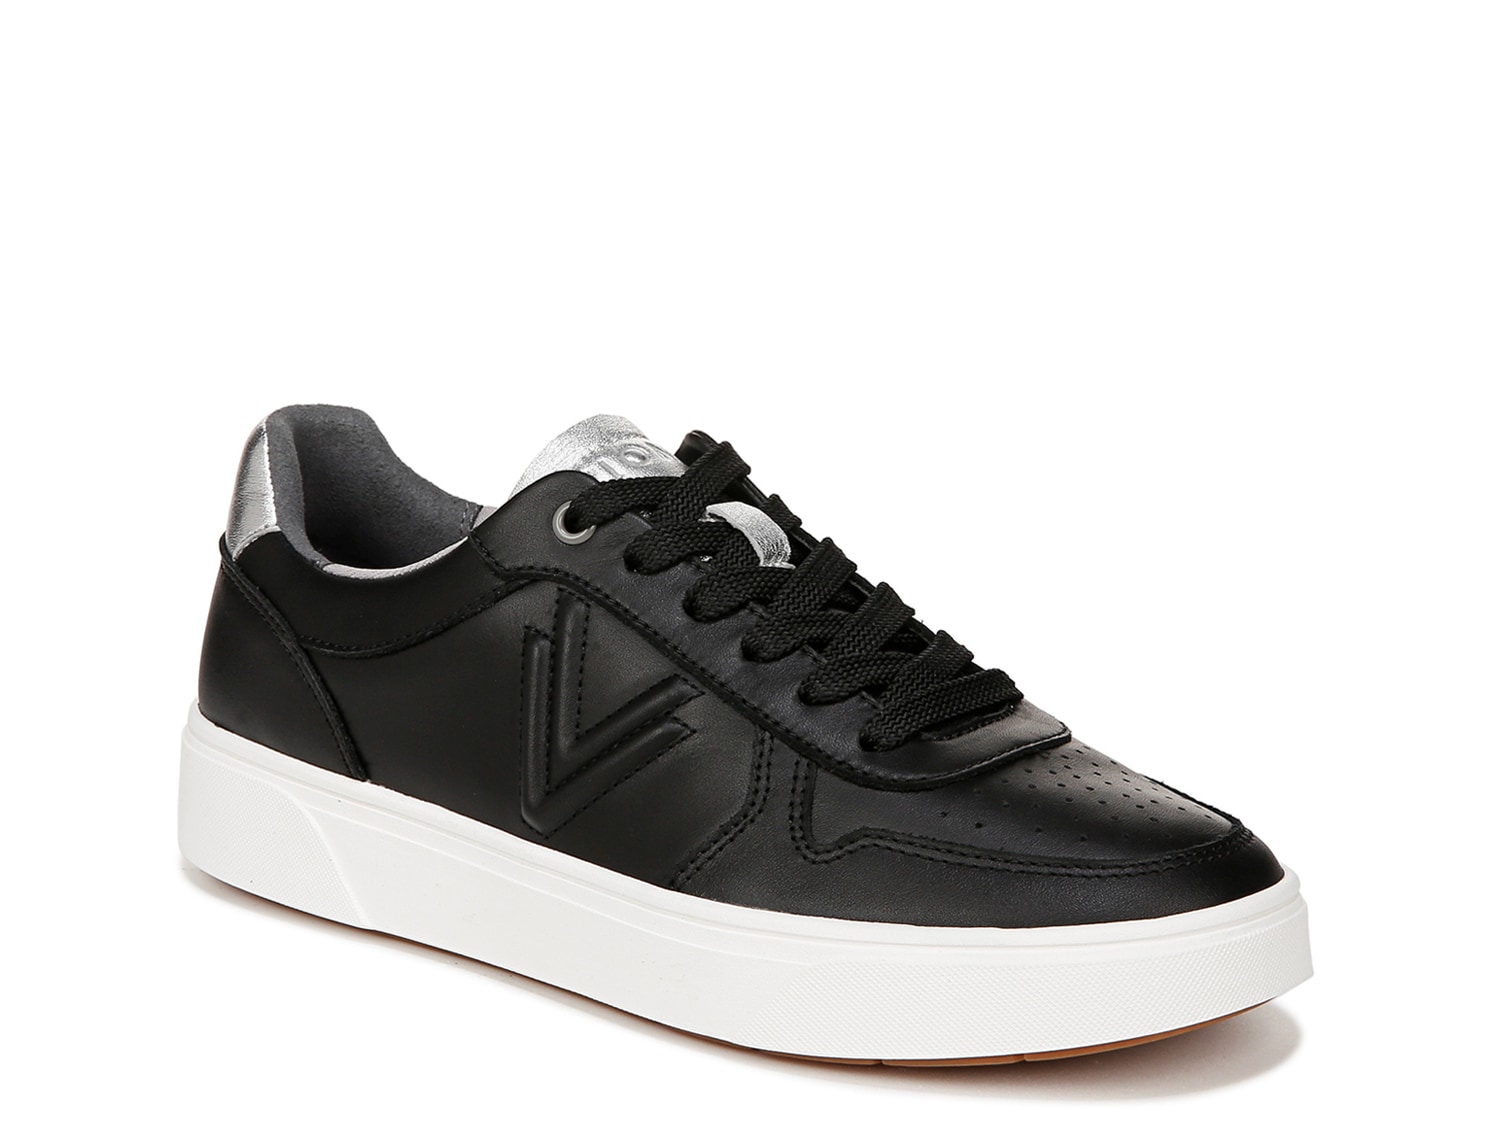 Vionic Kimmie Court Sneaker - Free Shipping | DSW